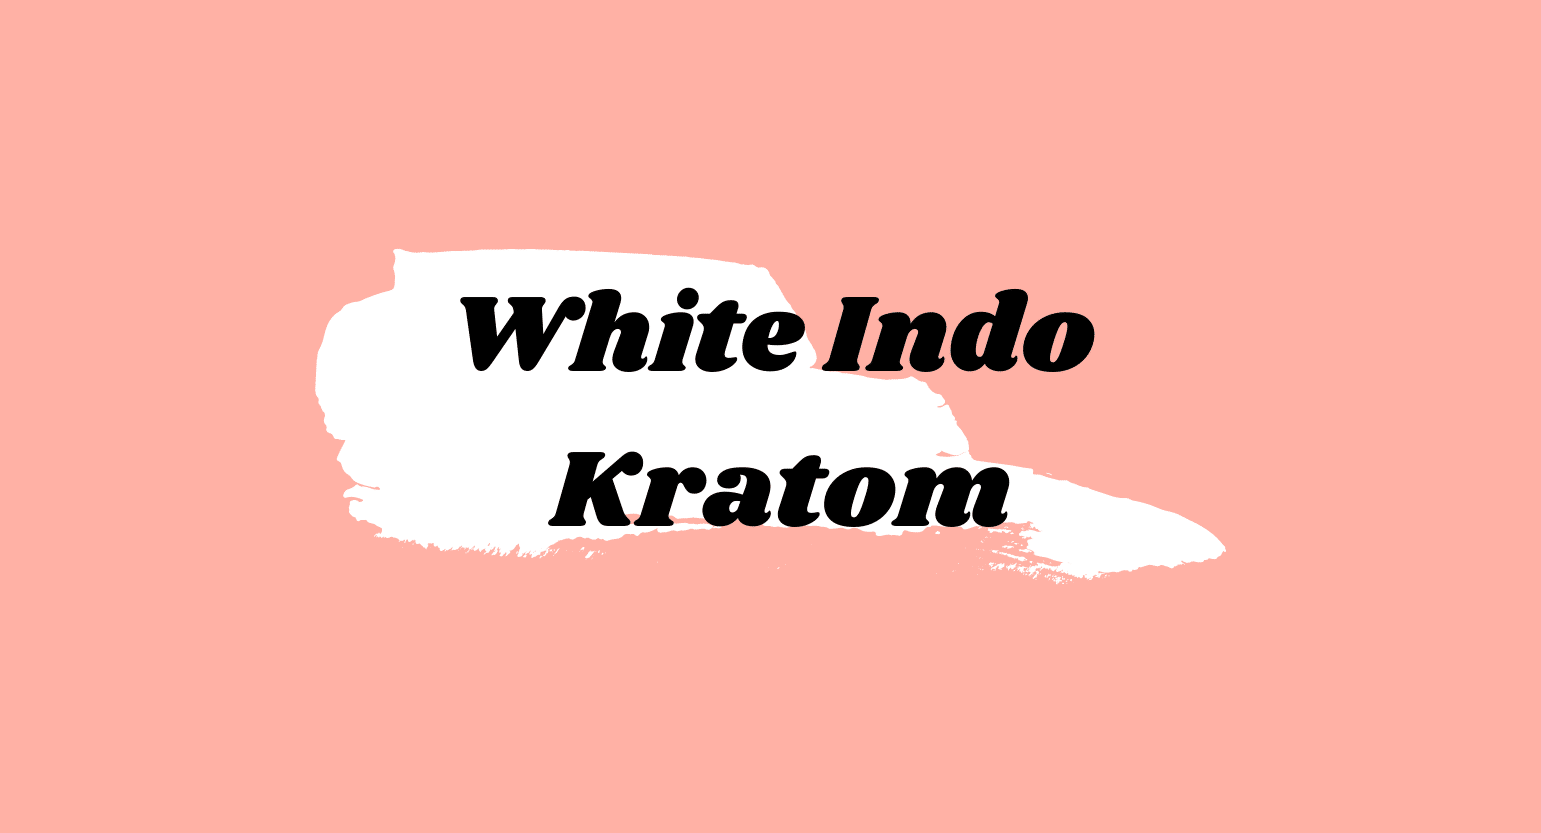 White Indo Kratom: Is This Strain Good For Productivity?